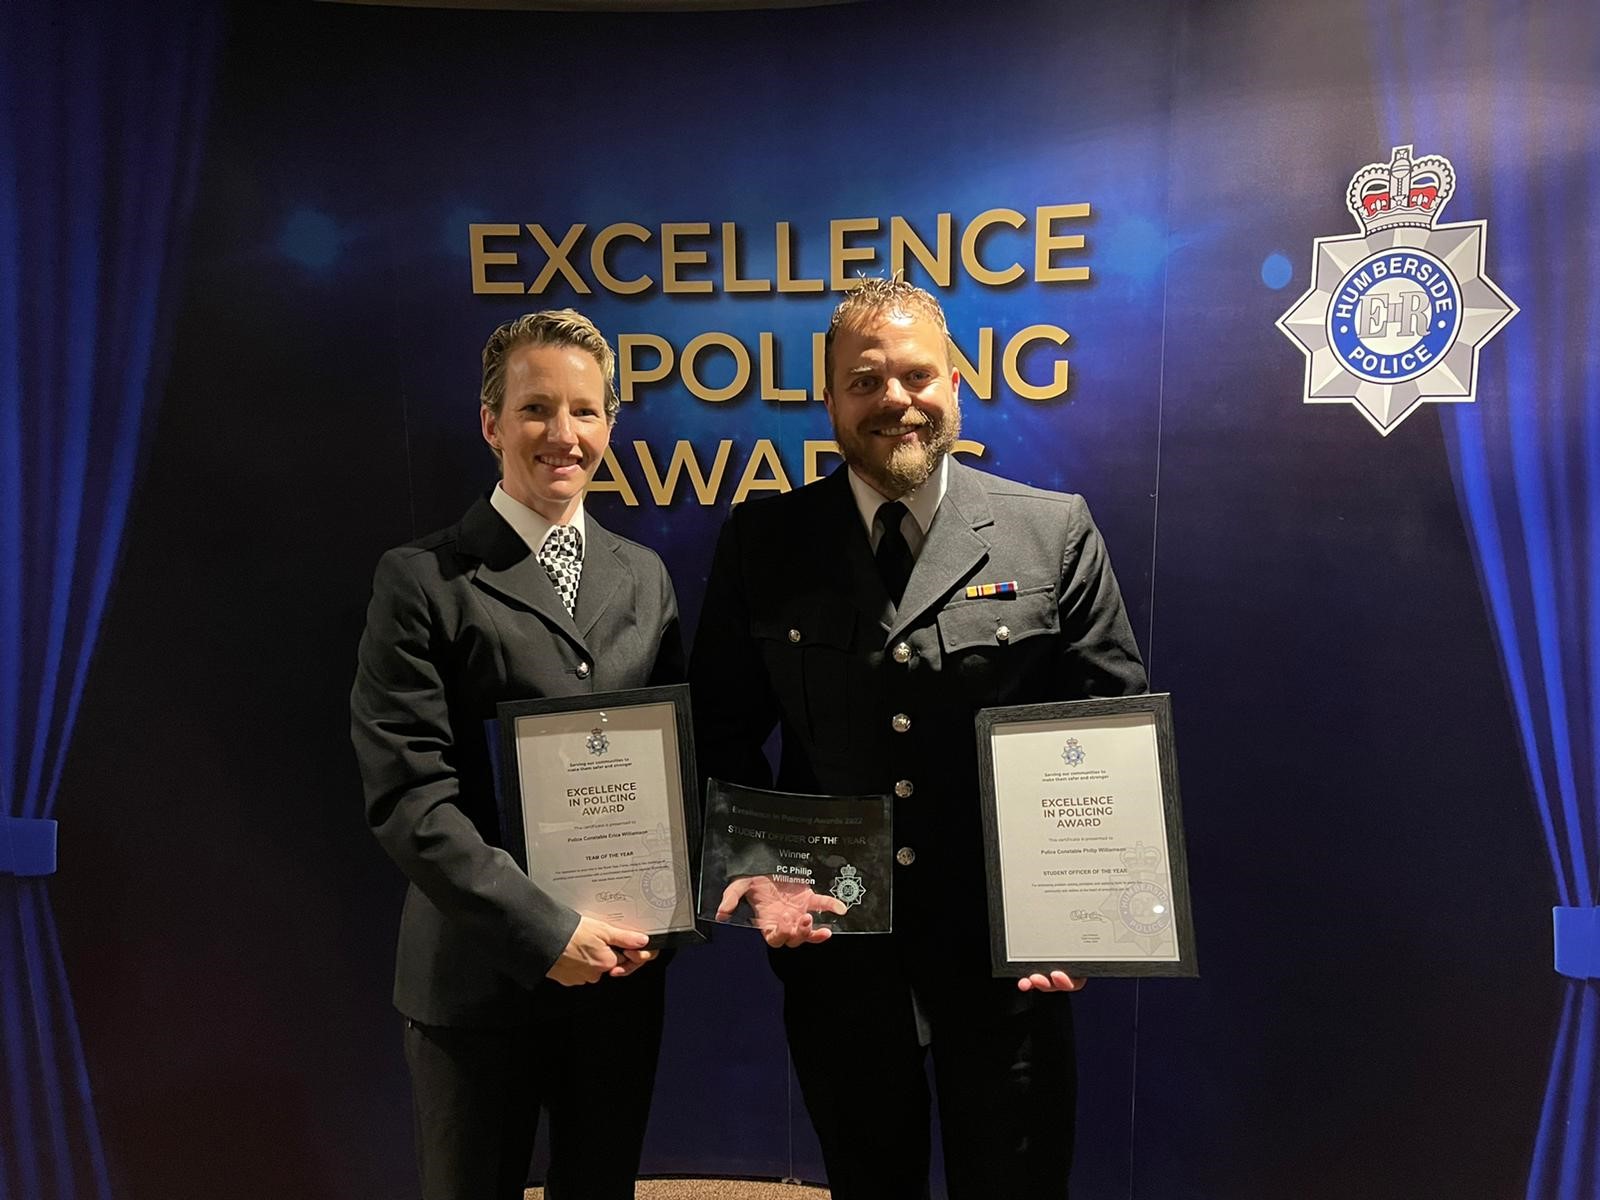 PC Williamson and wife (C6 officer)